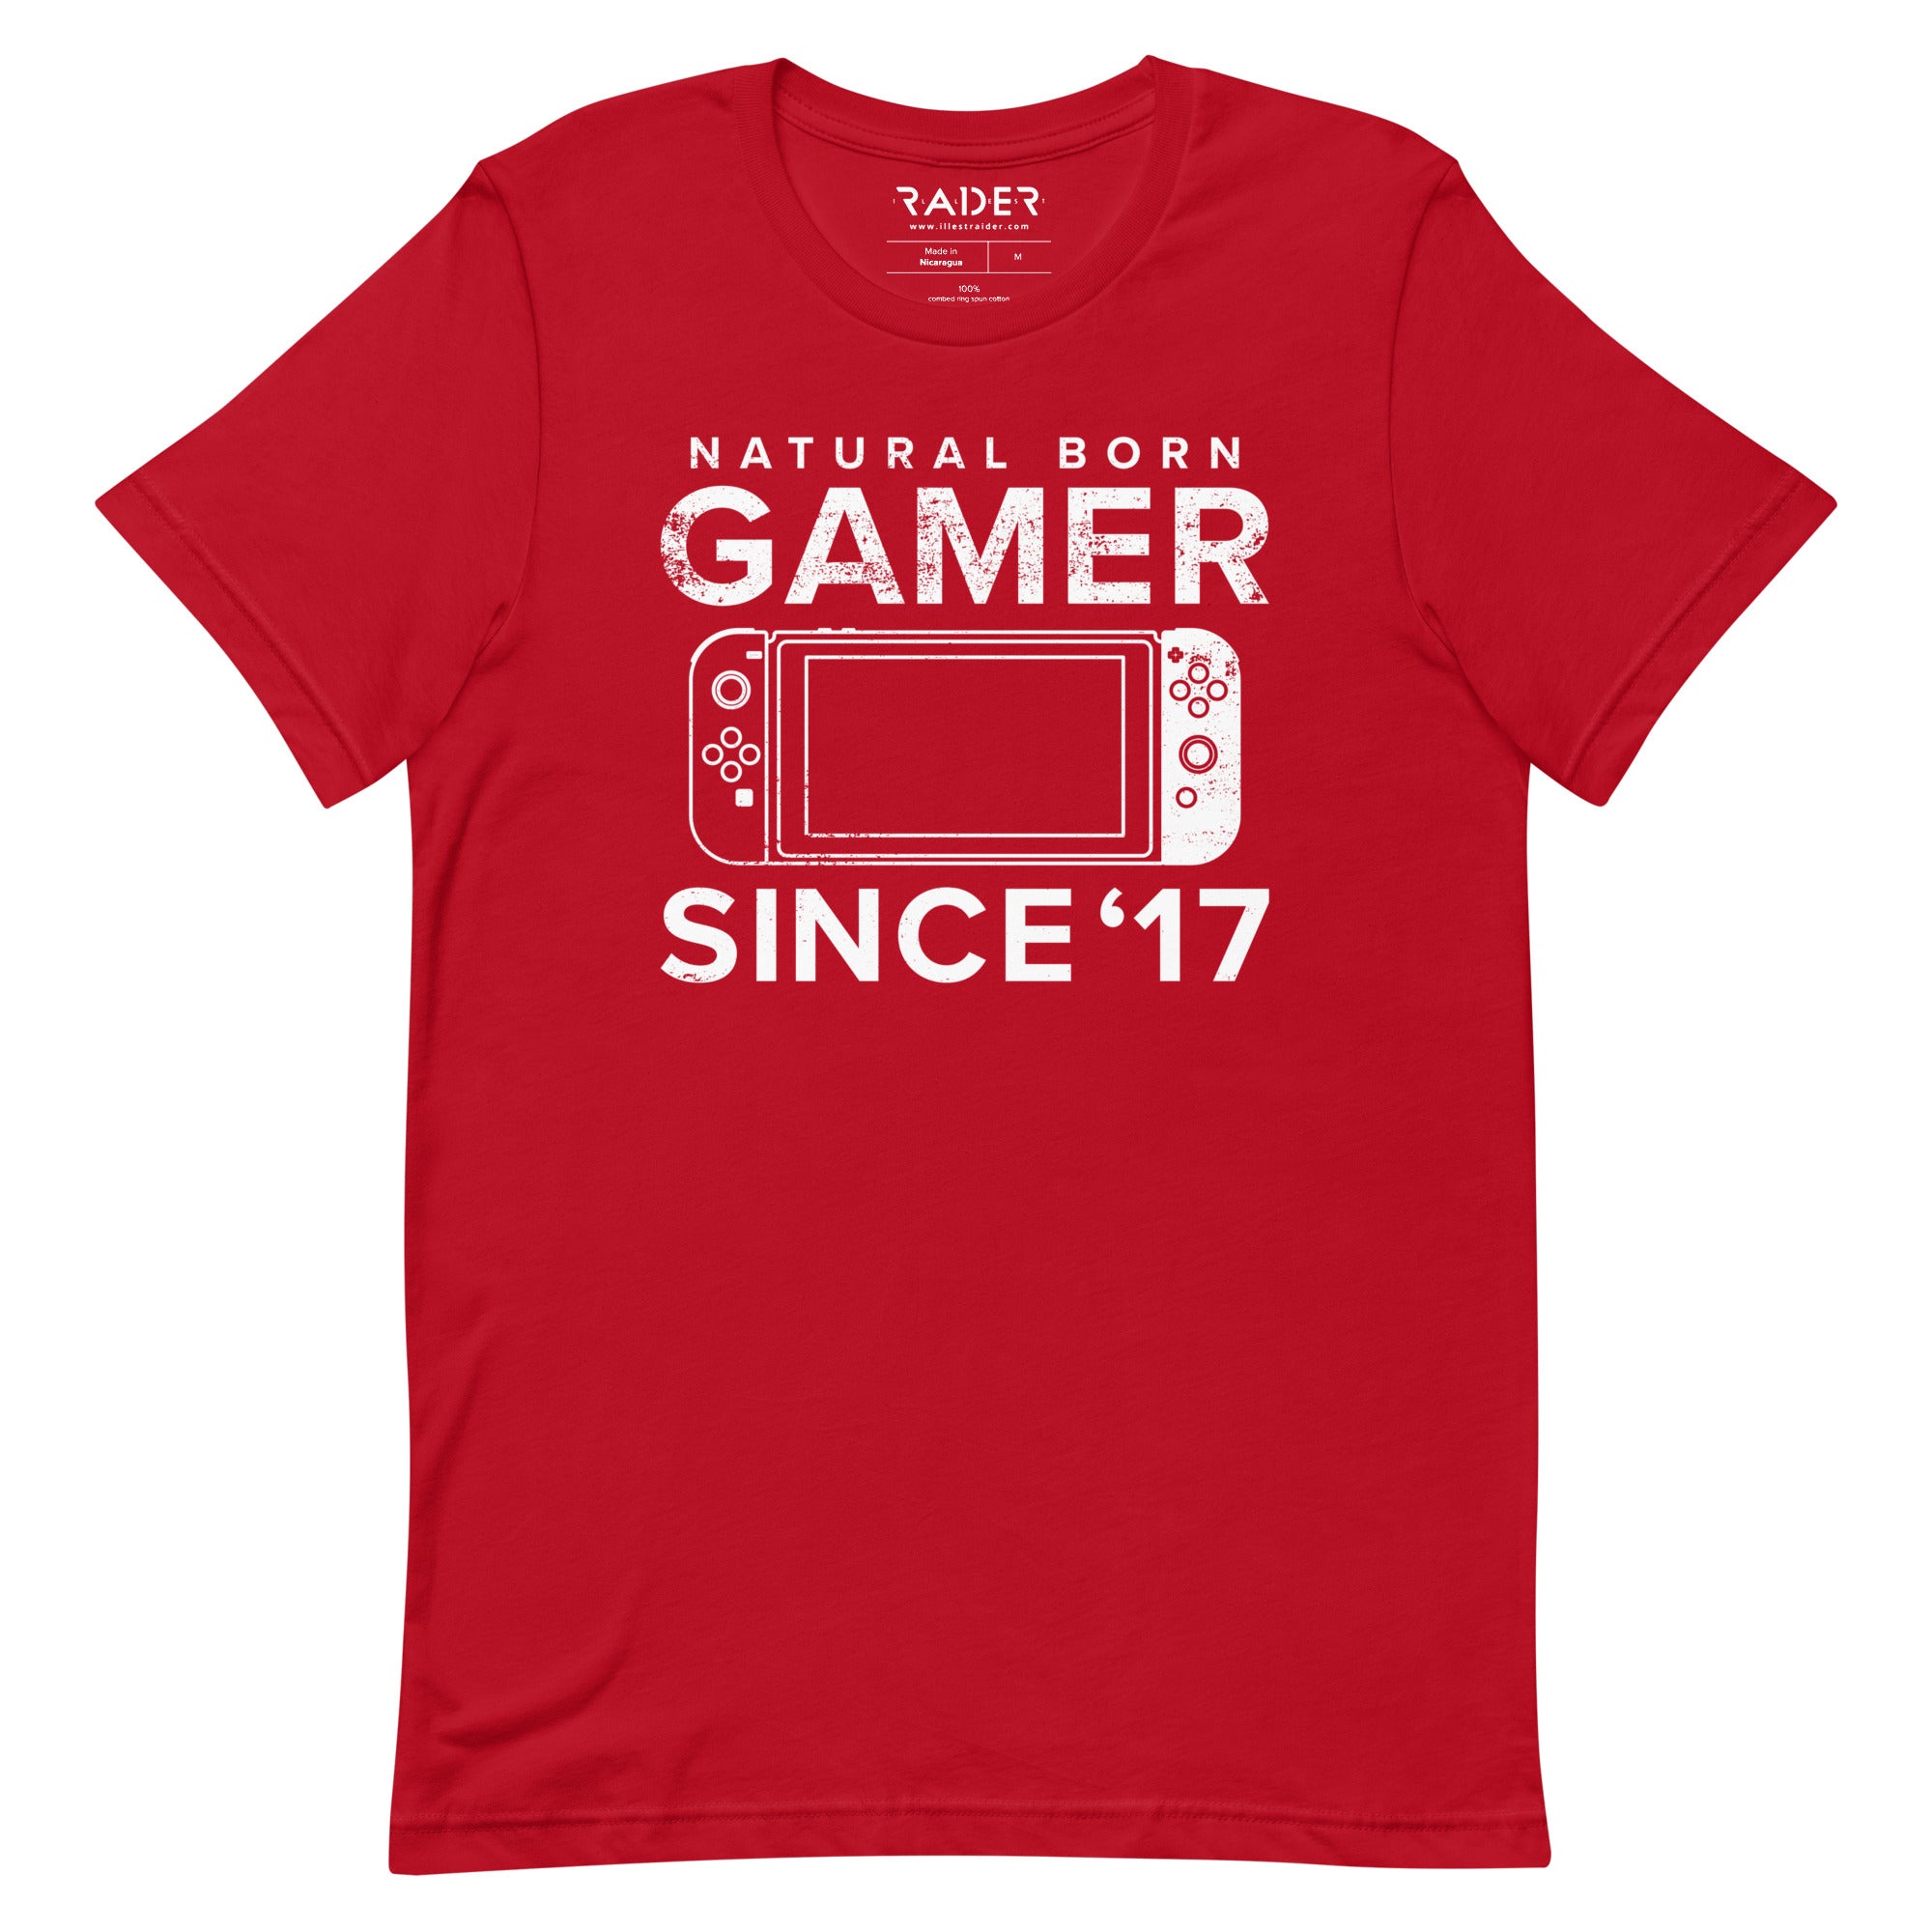 Natural Born Gamer Since &#39;17 Unisex Tee